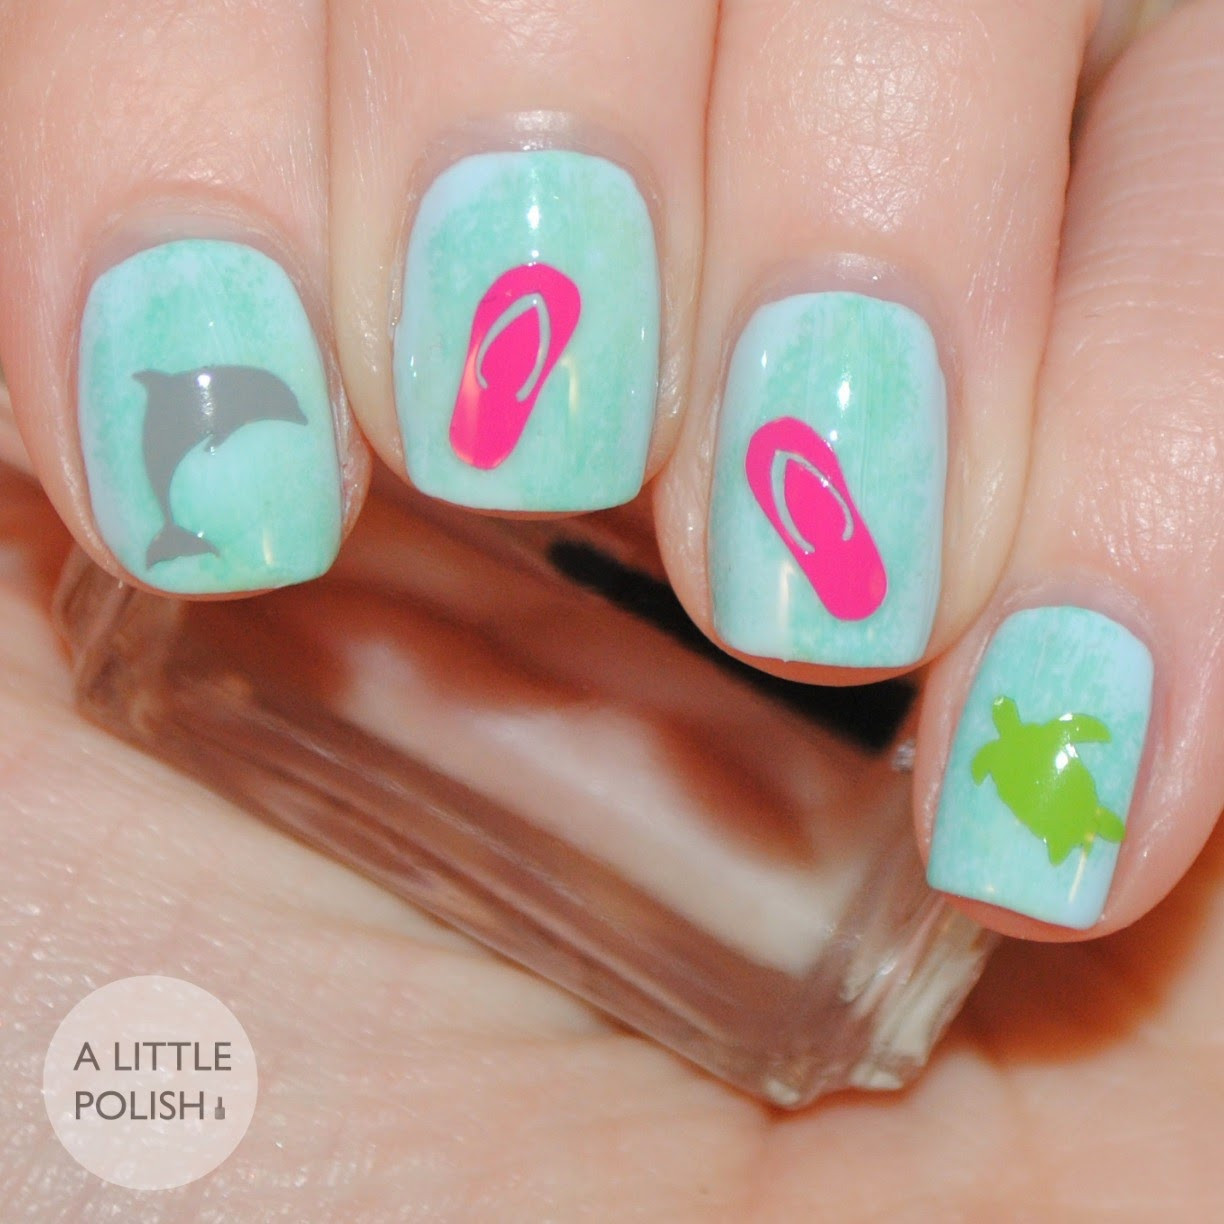 Nail Art Vinyls
 A Little Polish Vinyl Nail Decals from Lacquer by Lissa